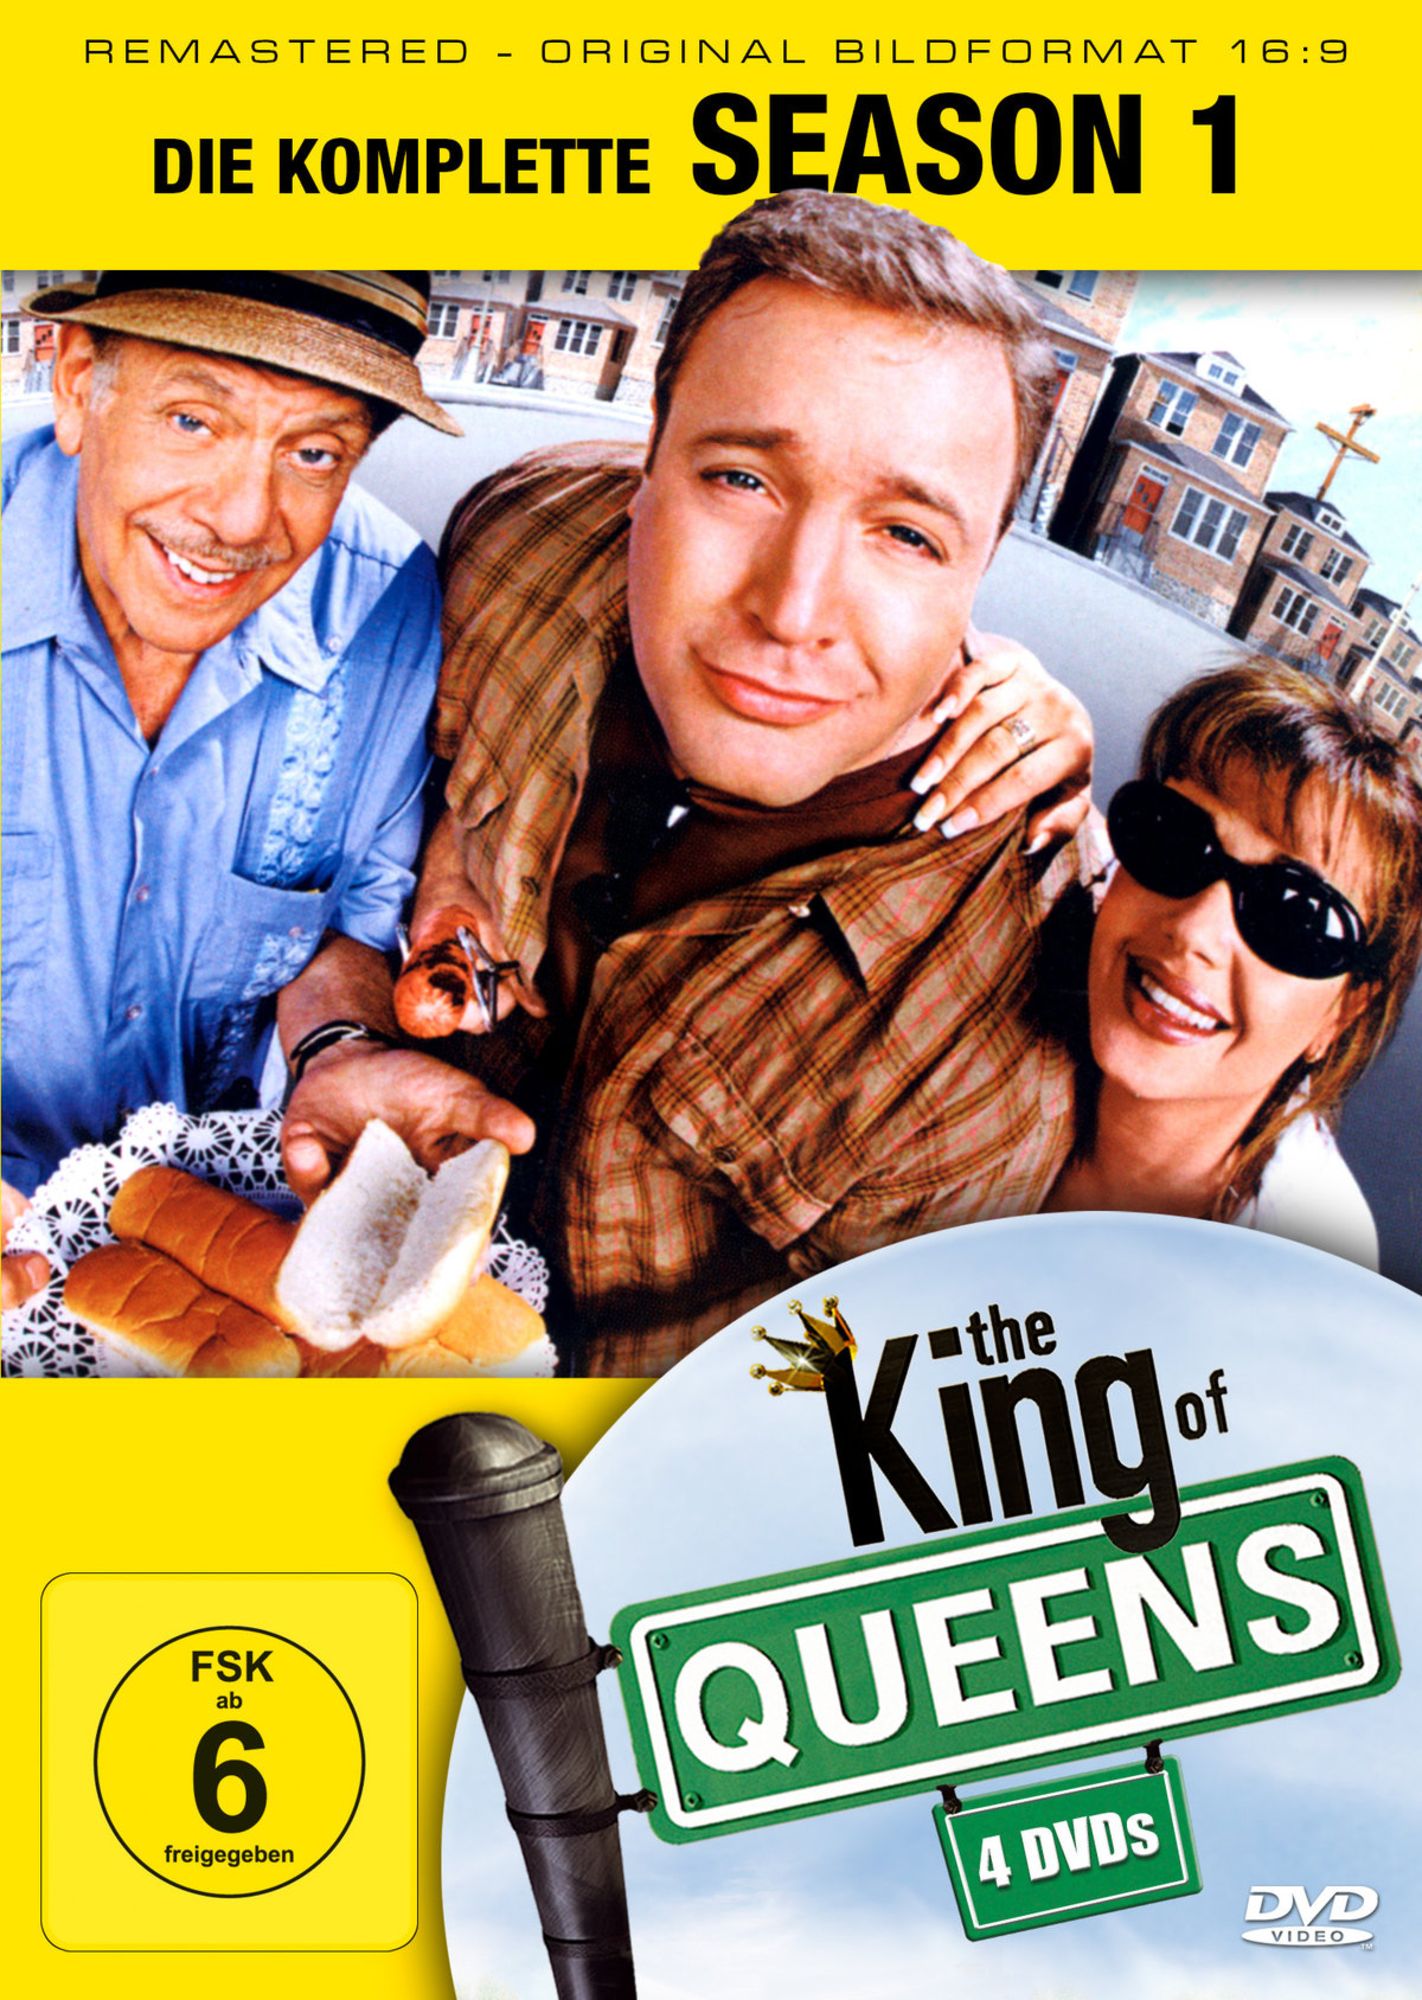 https://images.thalia.media/-/BF2000-2000/eec28e330f524f438729edfc782261fc/the-king-of-queens-staffel-1-dvd-kevin-james.jpeg